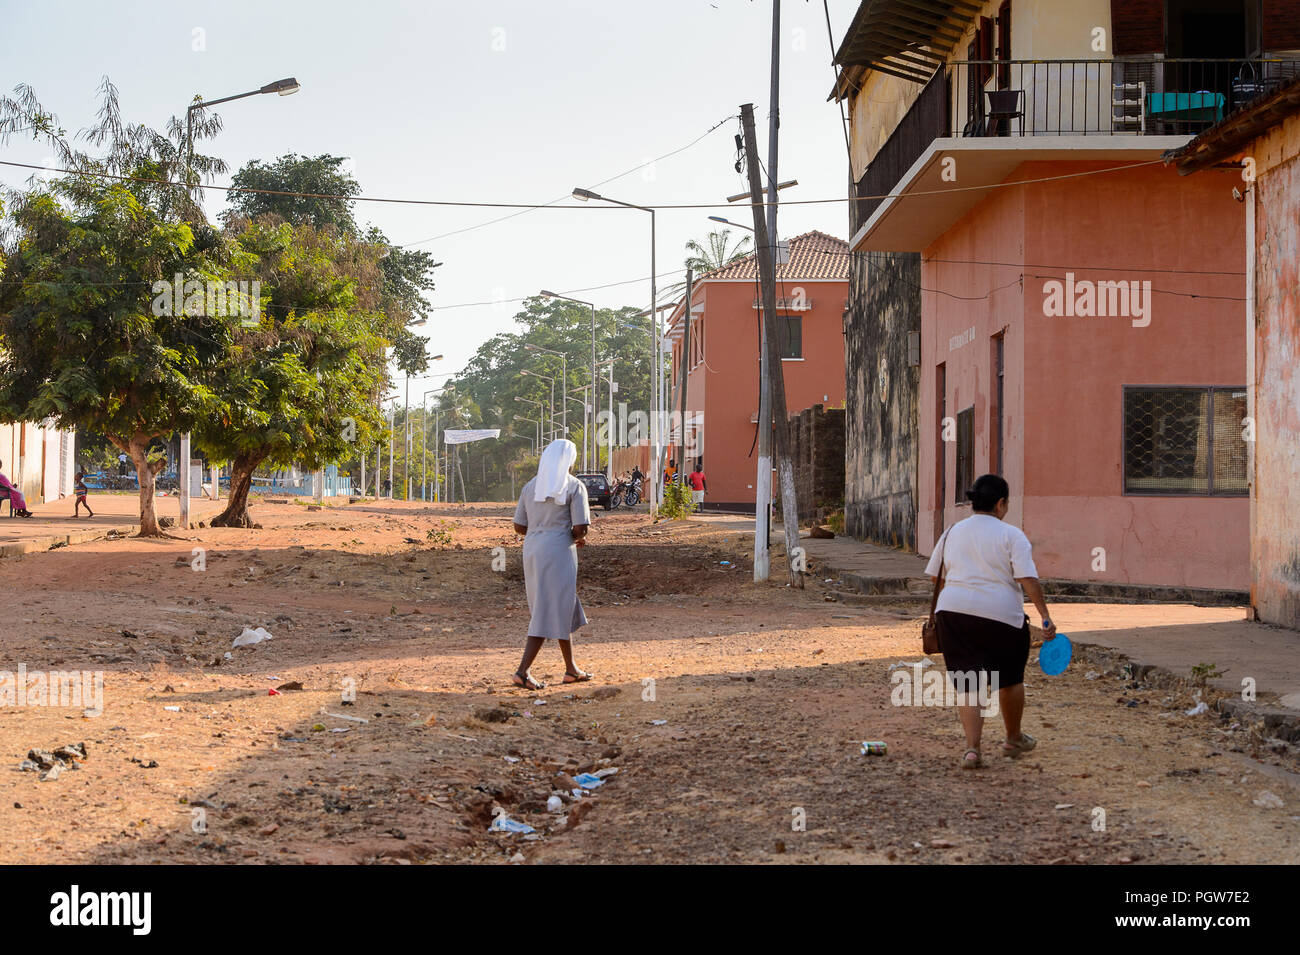 Bolama Island Guinea Bissau May 6 2017 Unidentified Local Woman Walks Along The Street In